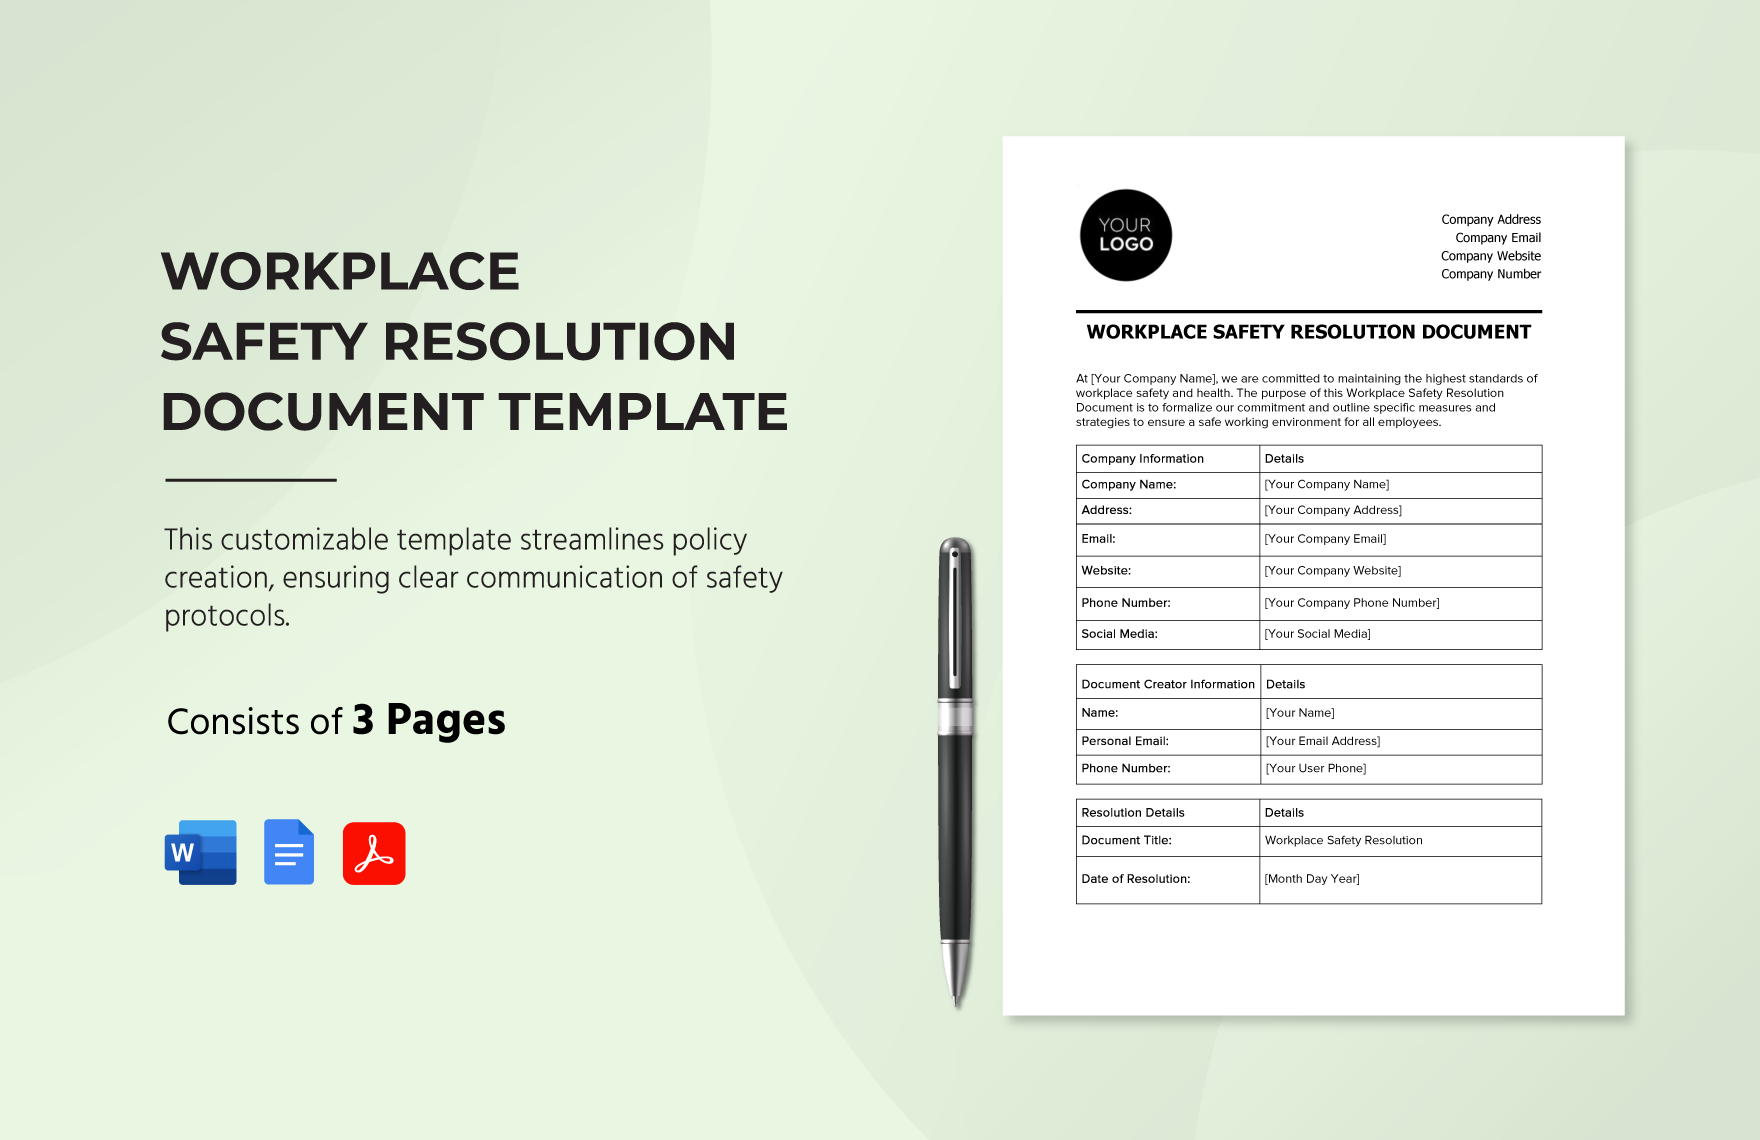 Workplace Safety Resolution Document Template in Word, Google Docs, PDF